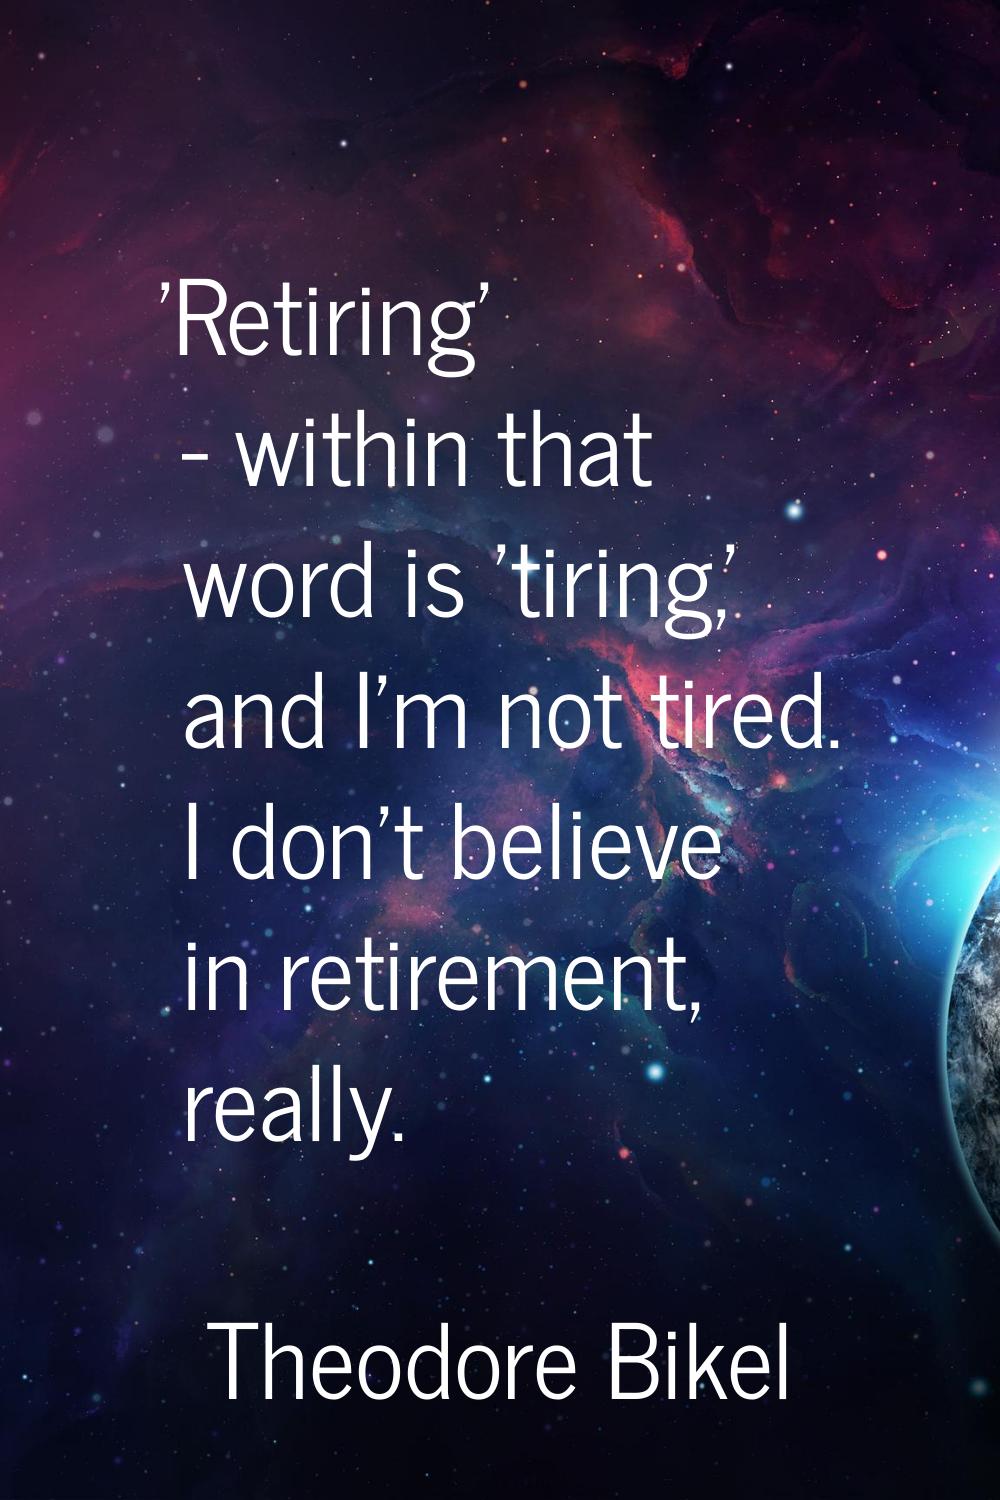 'Retiring' - within that word is 'tiring,' and I'm not tired. I don't believe in retirement, really